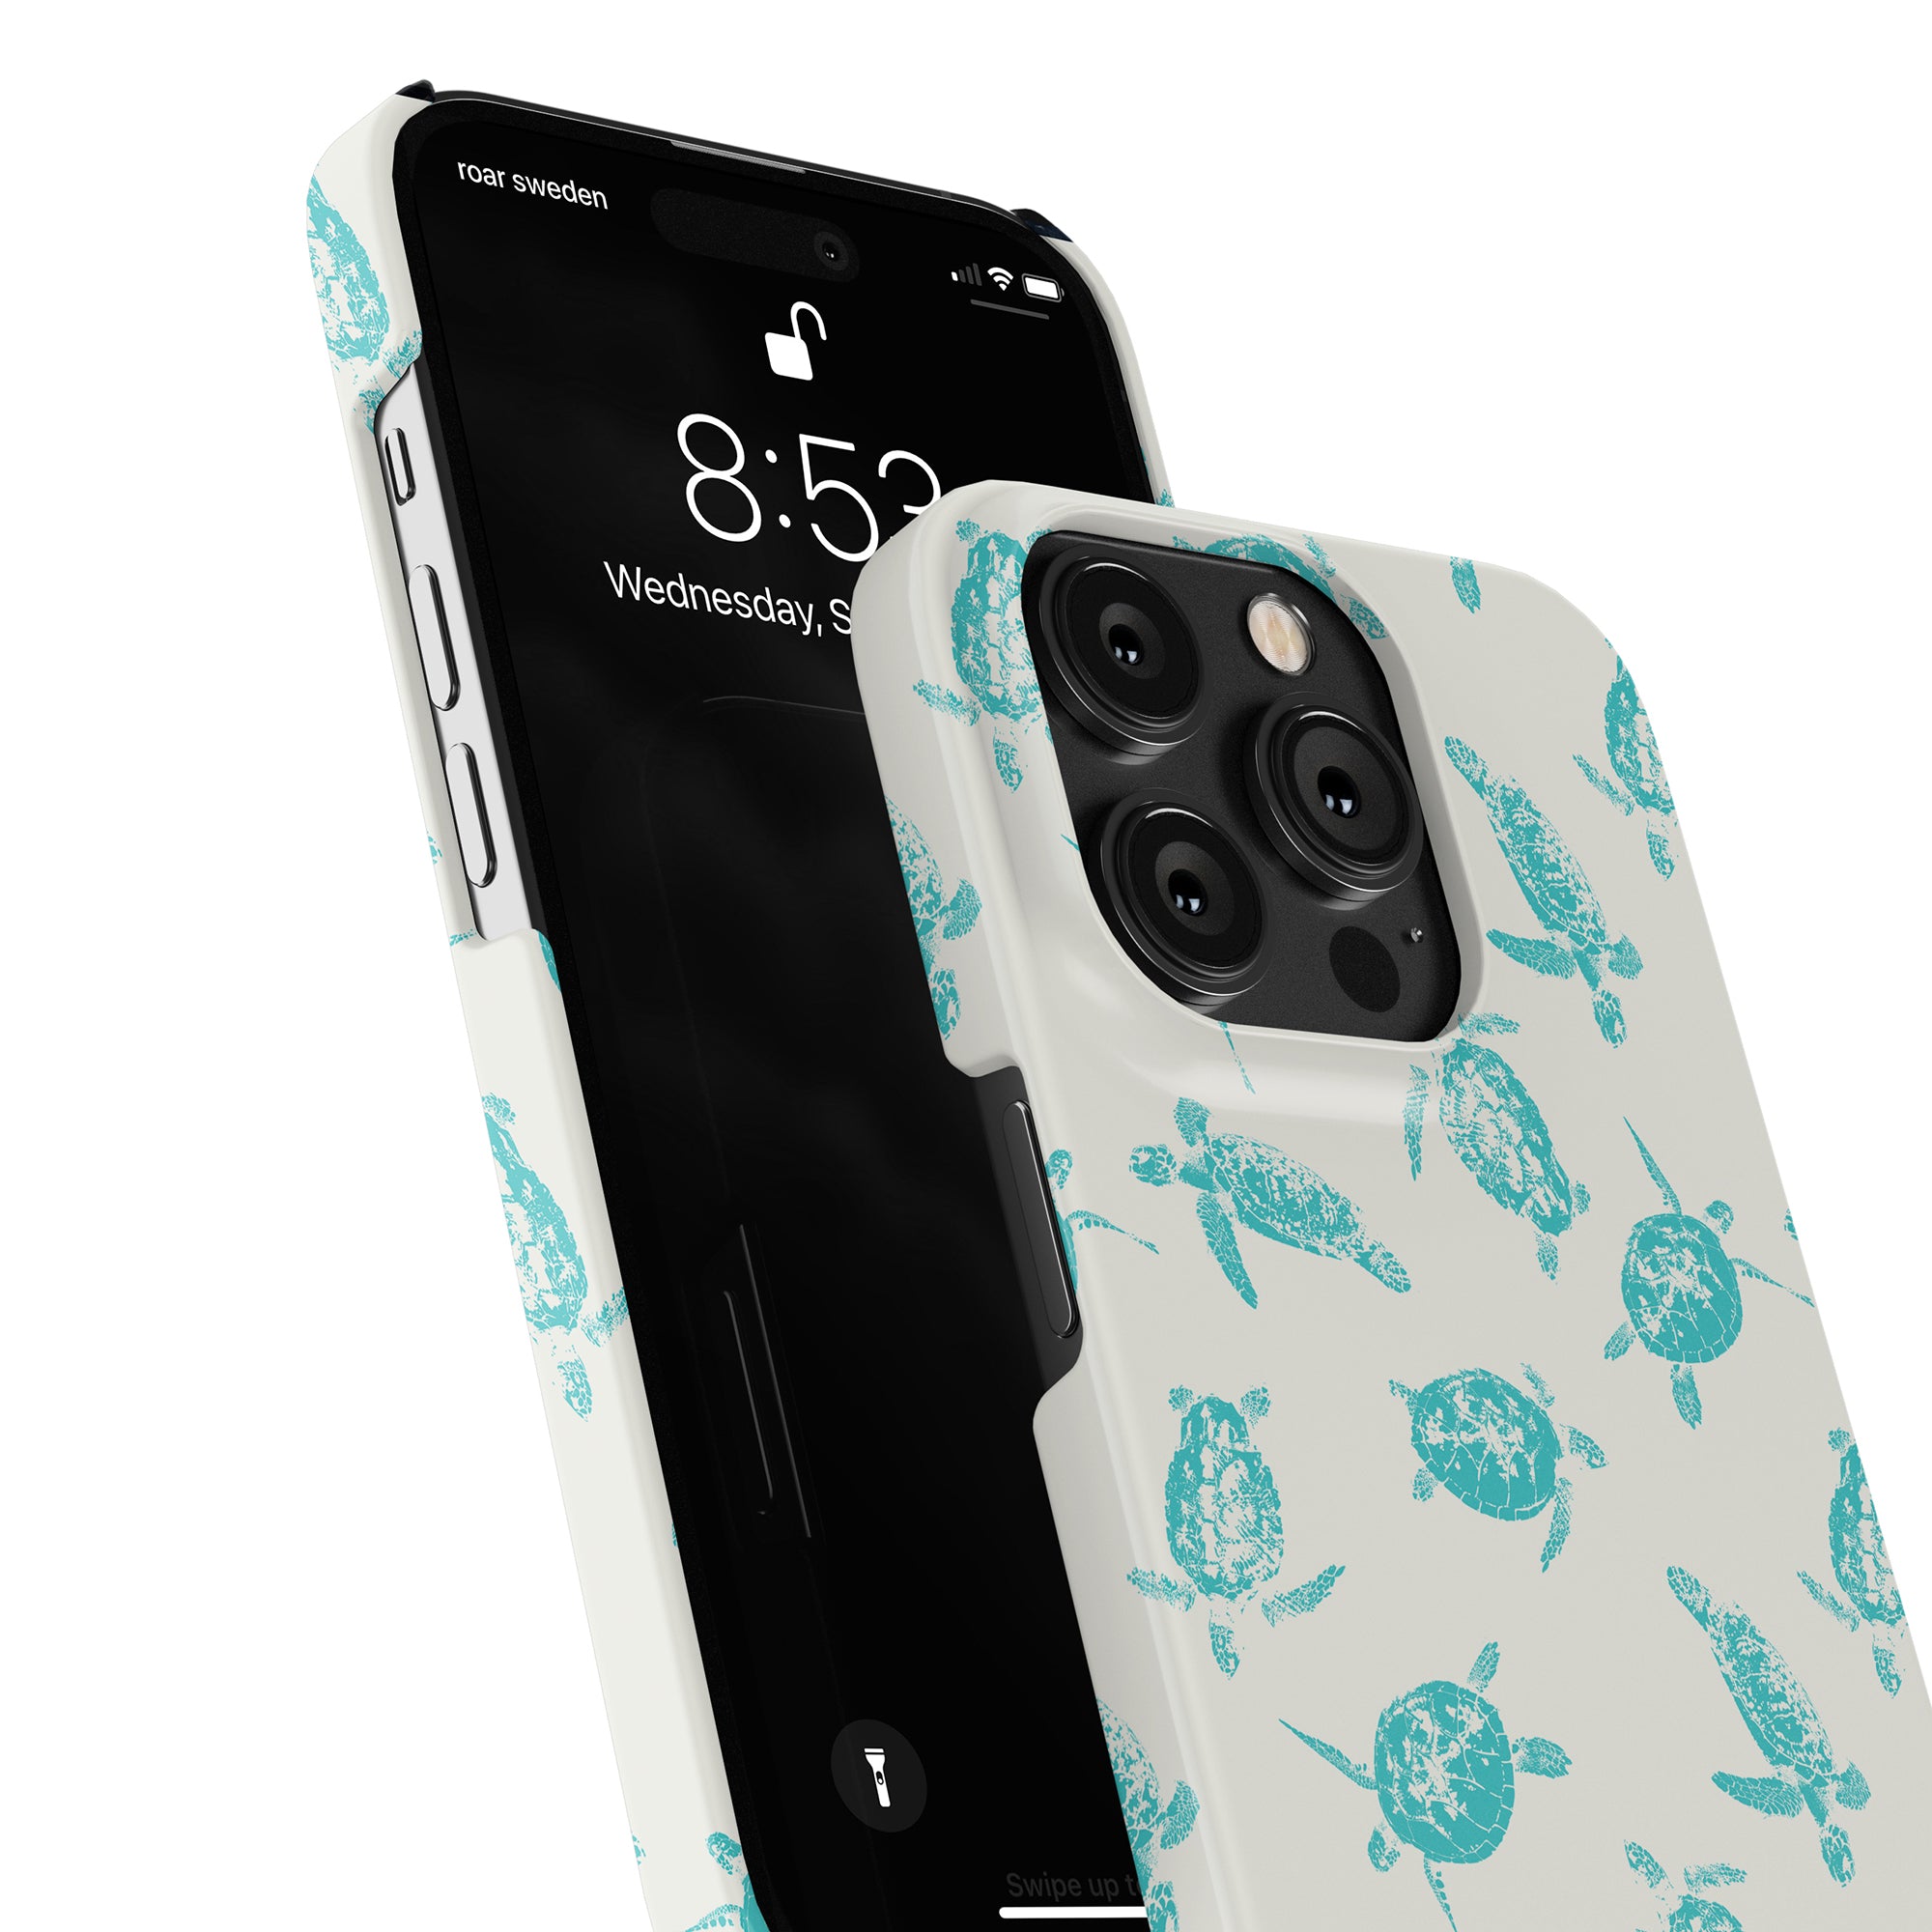 Sea Turtles - Slim casephone designed with organic skincare in mind, showing the front and back, highlighting the camera and screen.